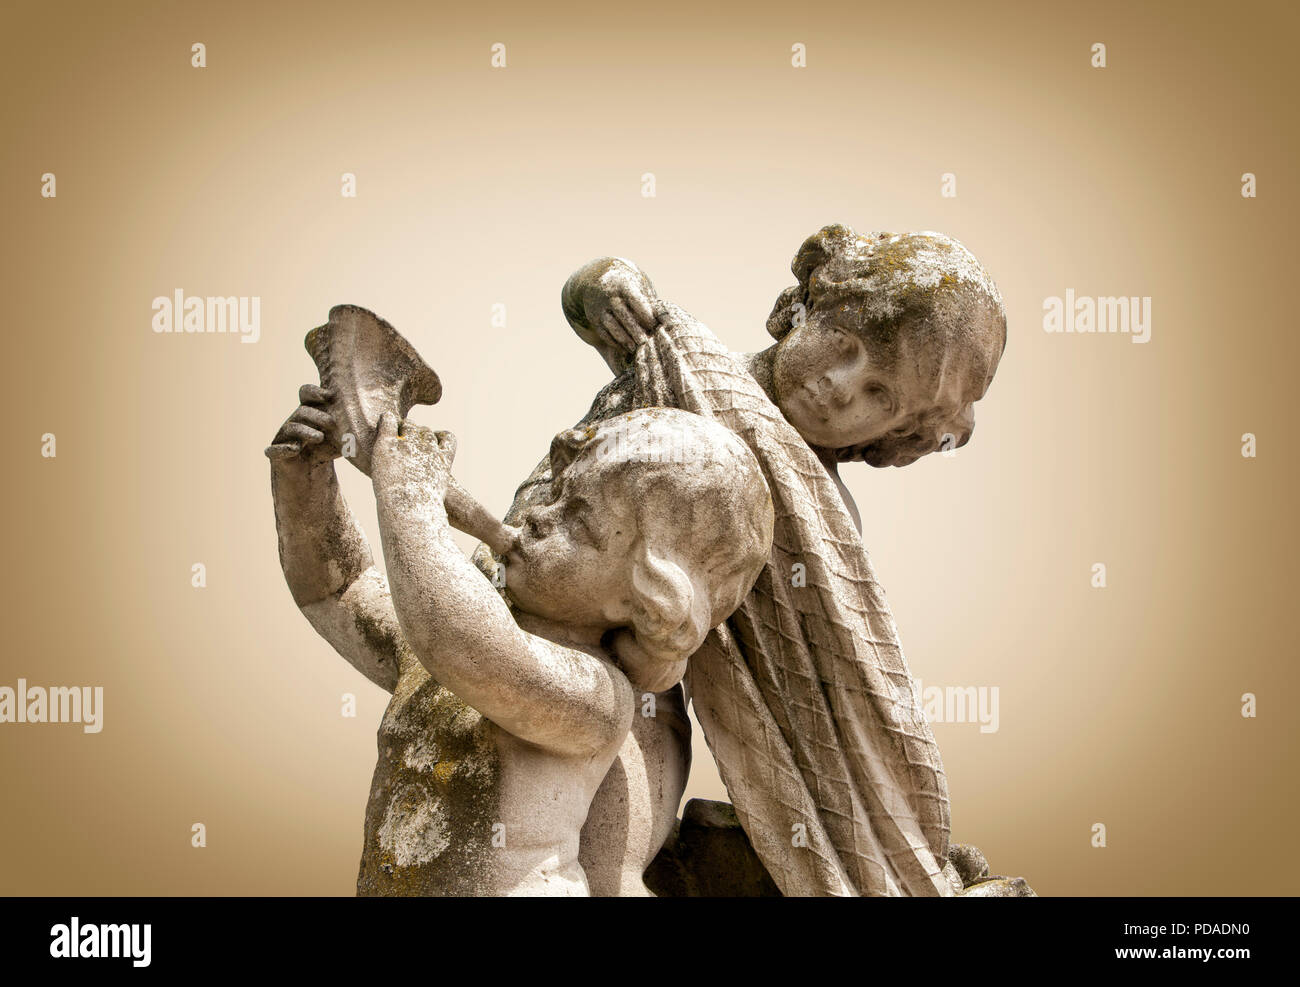 Baroque cherubs, sculpture at Nordkirchen Moated Palace, Germany Stock Photo